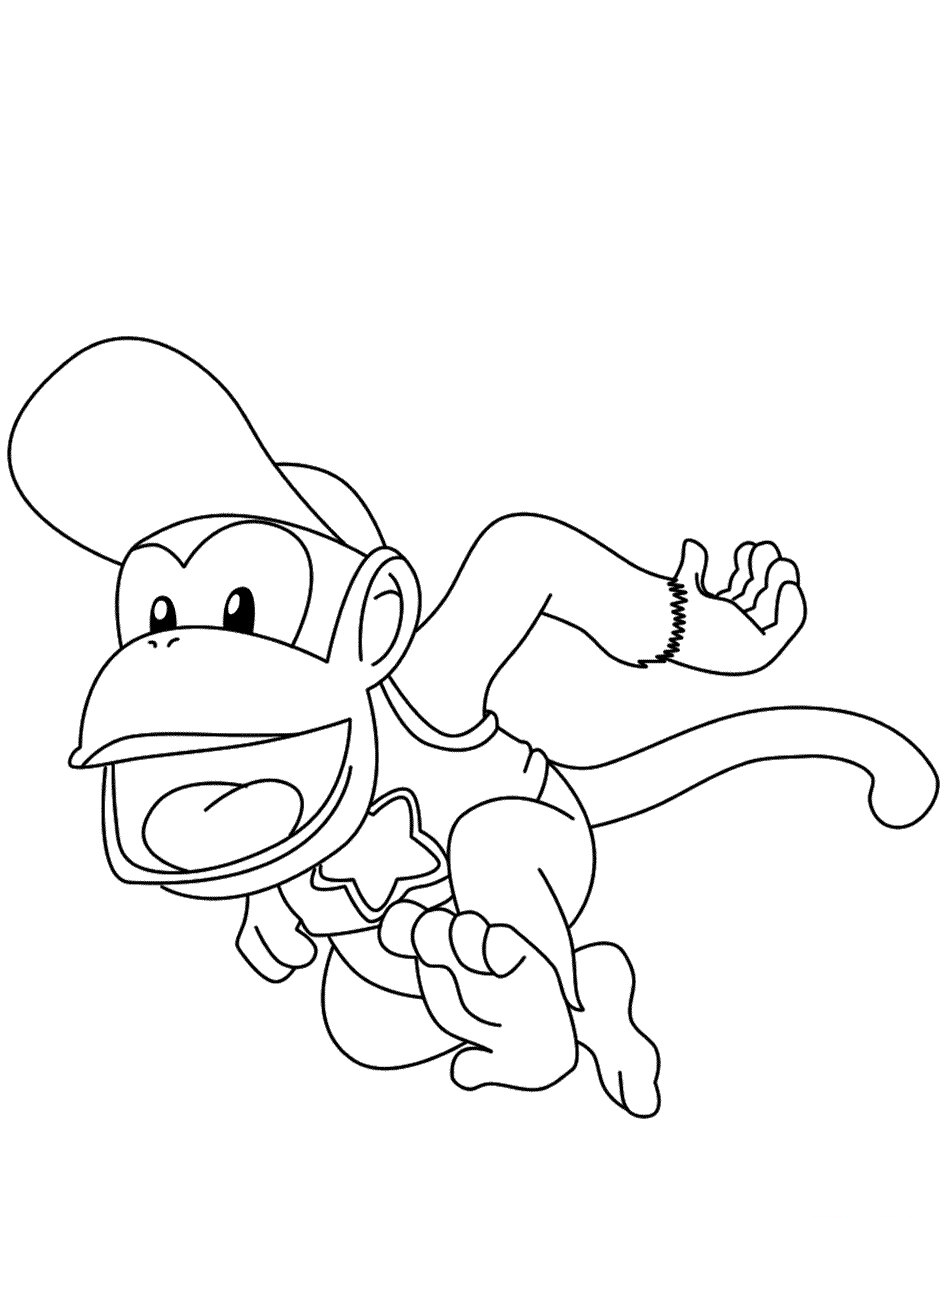 Diddy Kong is wearing a cap is running from Diddy Kong